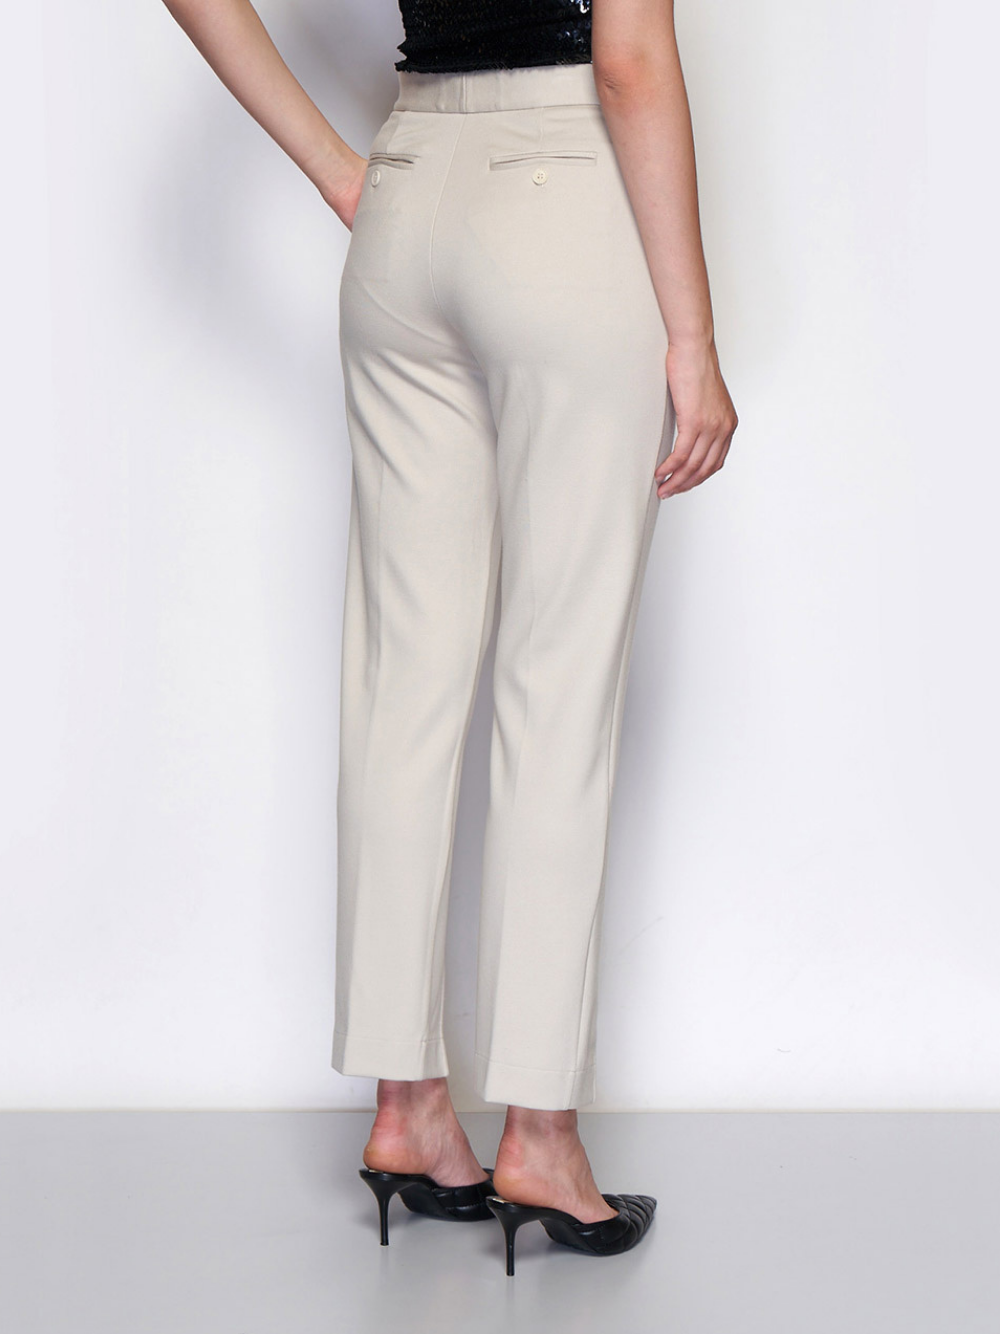 CK-CALVIN-KLEIN-LIGHT-PONTE-TAILORED-PANTS-WITH-FRONT-SLIT-NATURAL-2